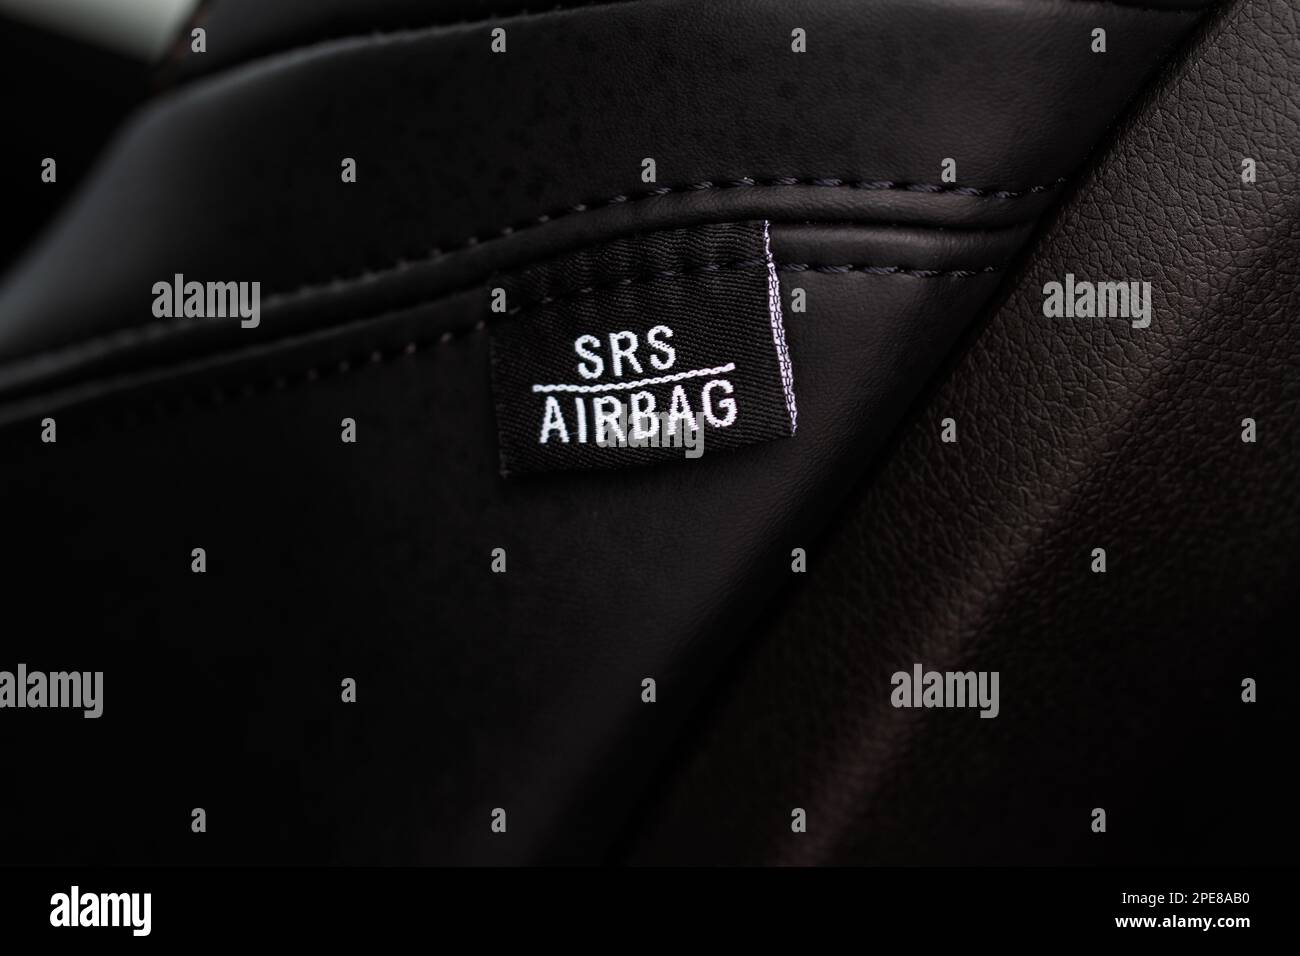 Close up view of airbag label on the side of a car seat. Airbag safety system symbol on the car seat. Modern car interior details. Stock Photo